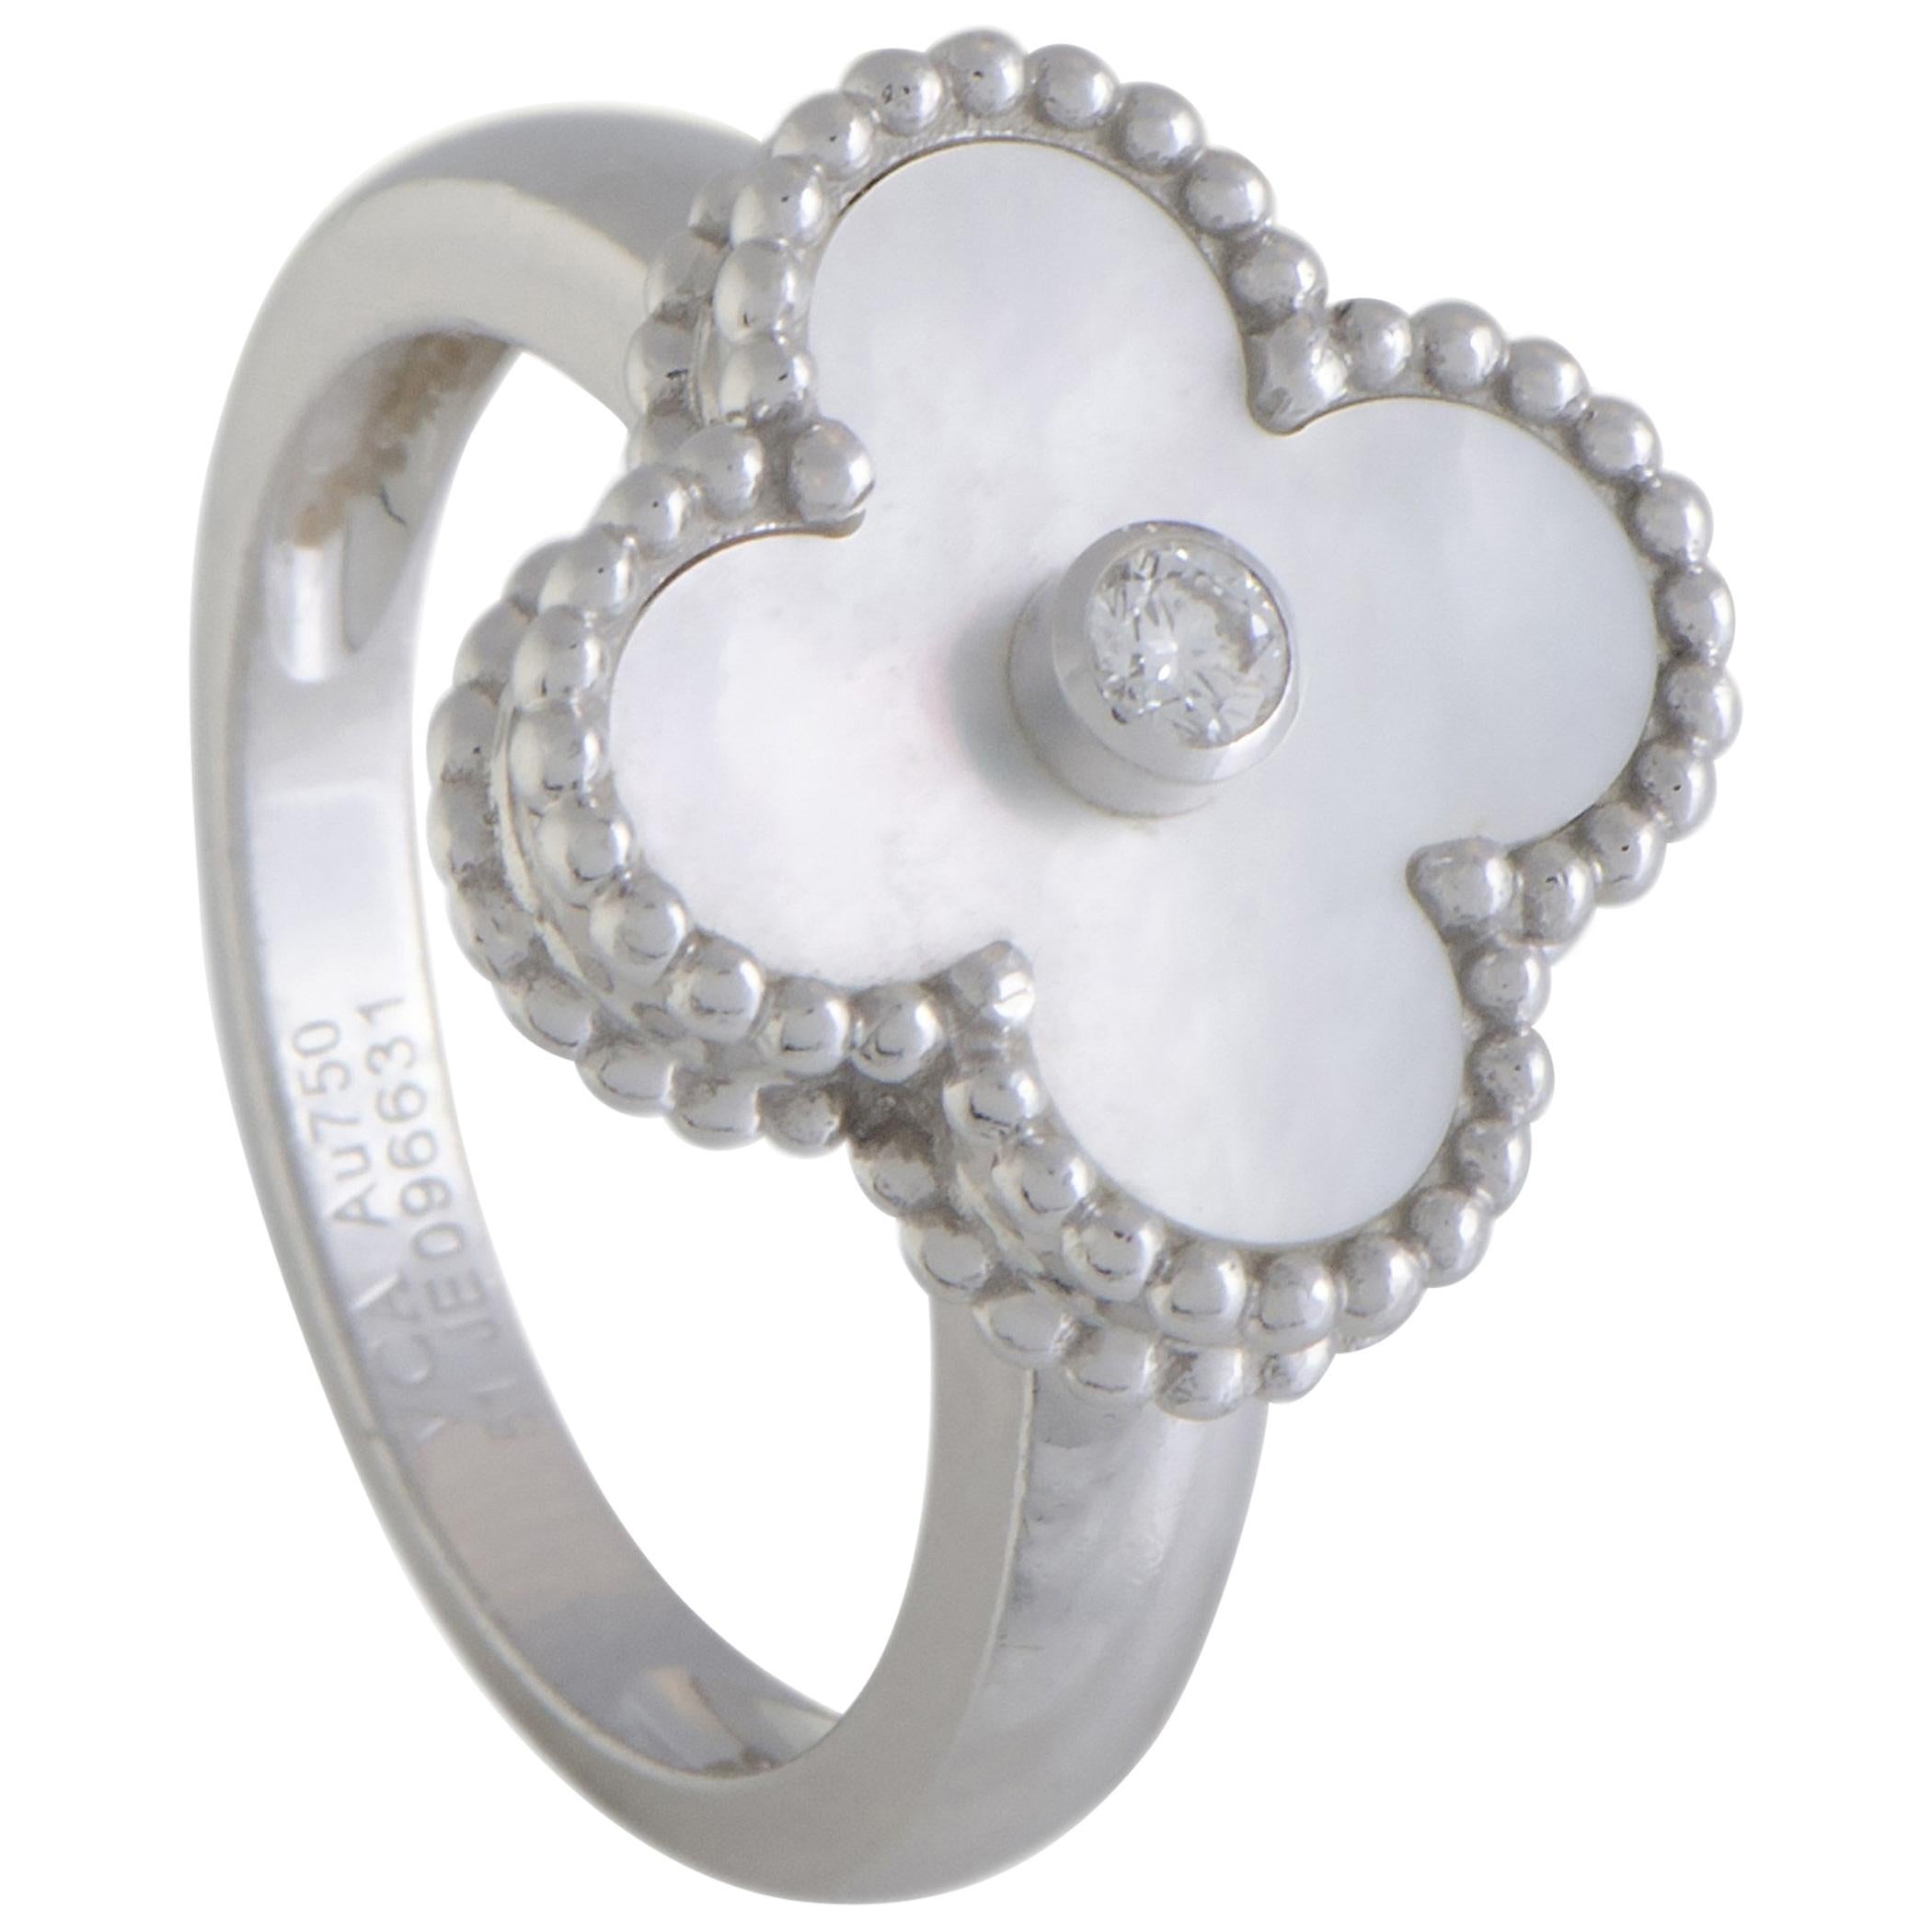 Van Cleef & Arpels Vintage Alhambra White Gold Diamond and Mother of Pearl Ring